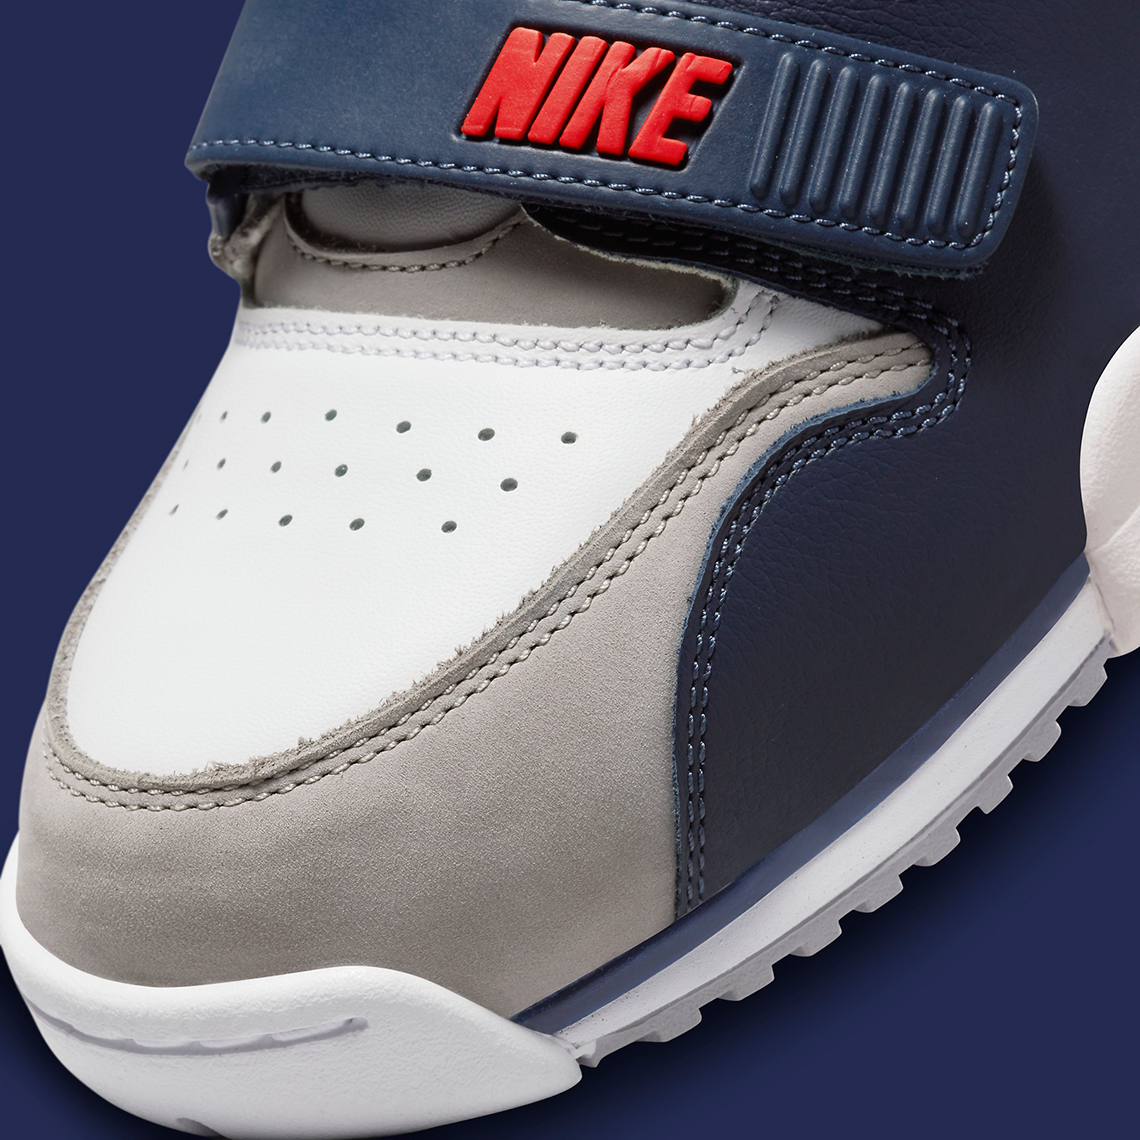 Nike Air Trainer 1 White Grey Navy Red Dm0521 101 2